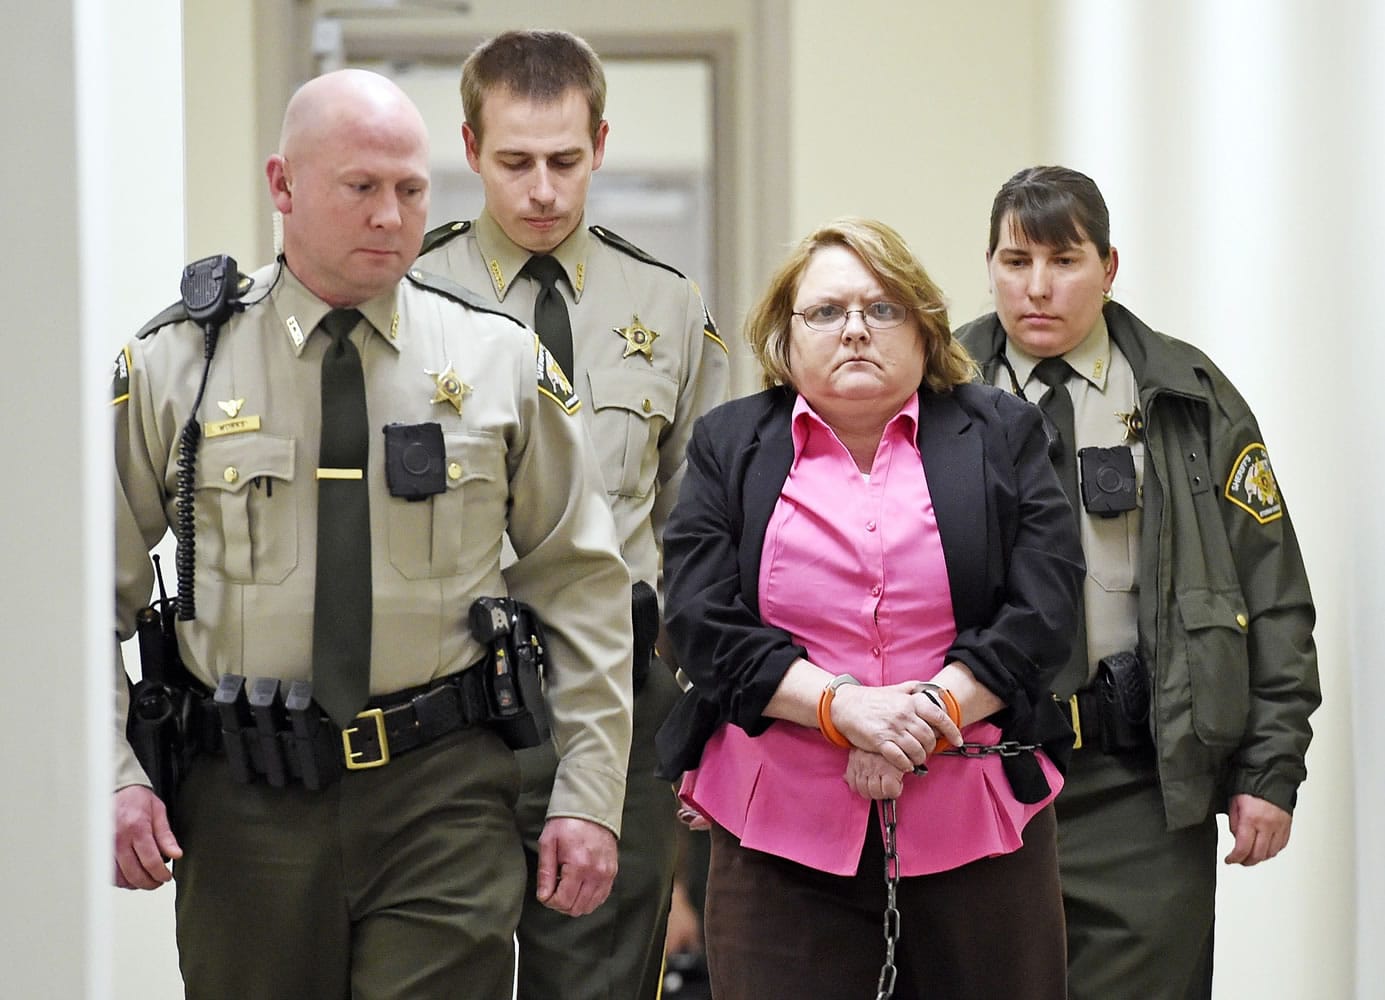 Gadsden Times files
Joyce Hardin Garrard, the Alabama woman convicted of running her 9-year-old granddaughter to death as punishment for lying about candy, was sentenced Monday to life in prison without the possibility of parole.